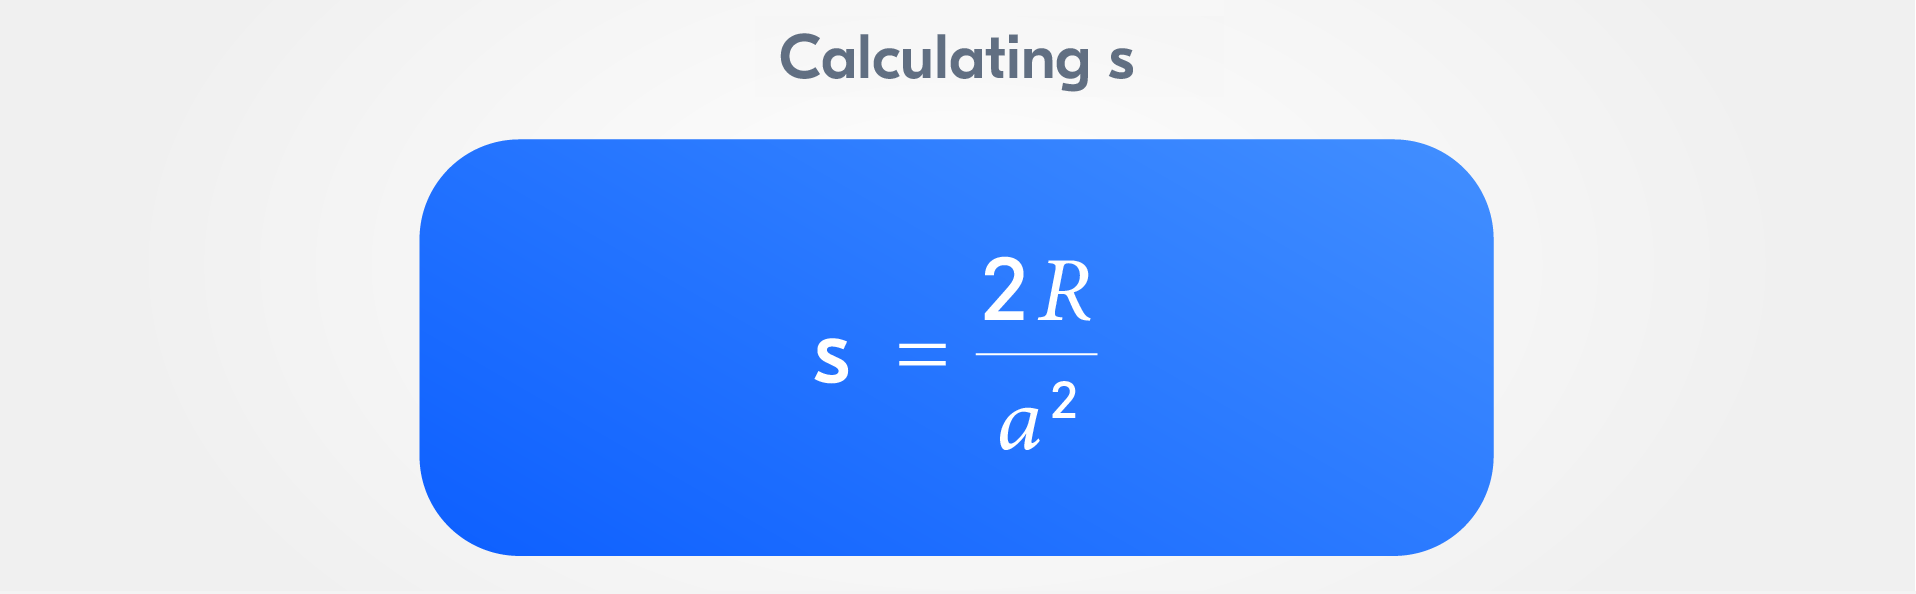 Formula to calculate the sale price